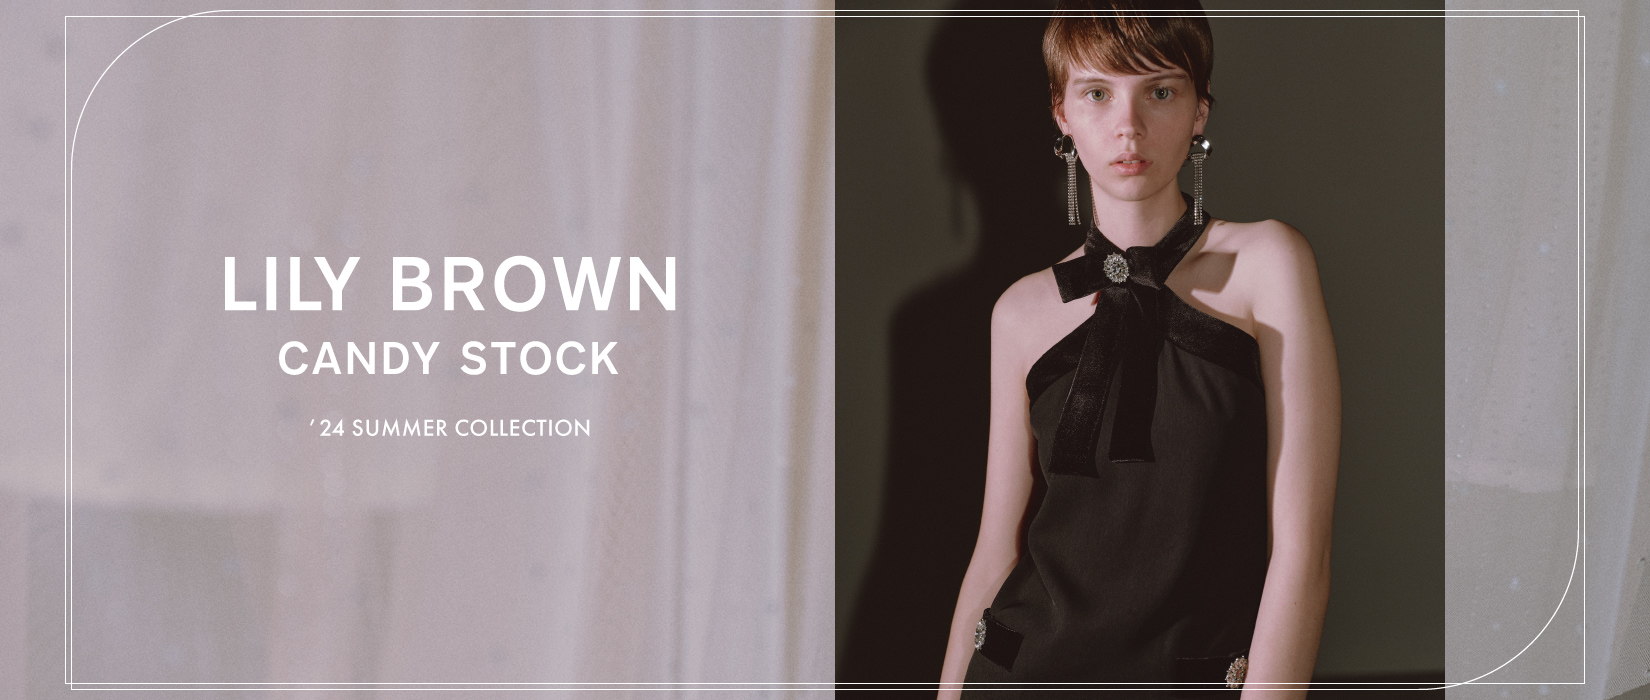 【LILY BROWN】CANDY STOCK '24 SUMMER COLLECTION